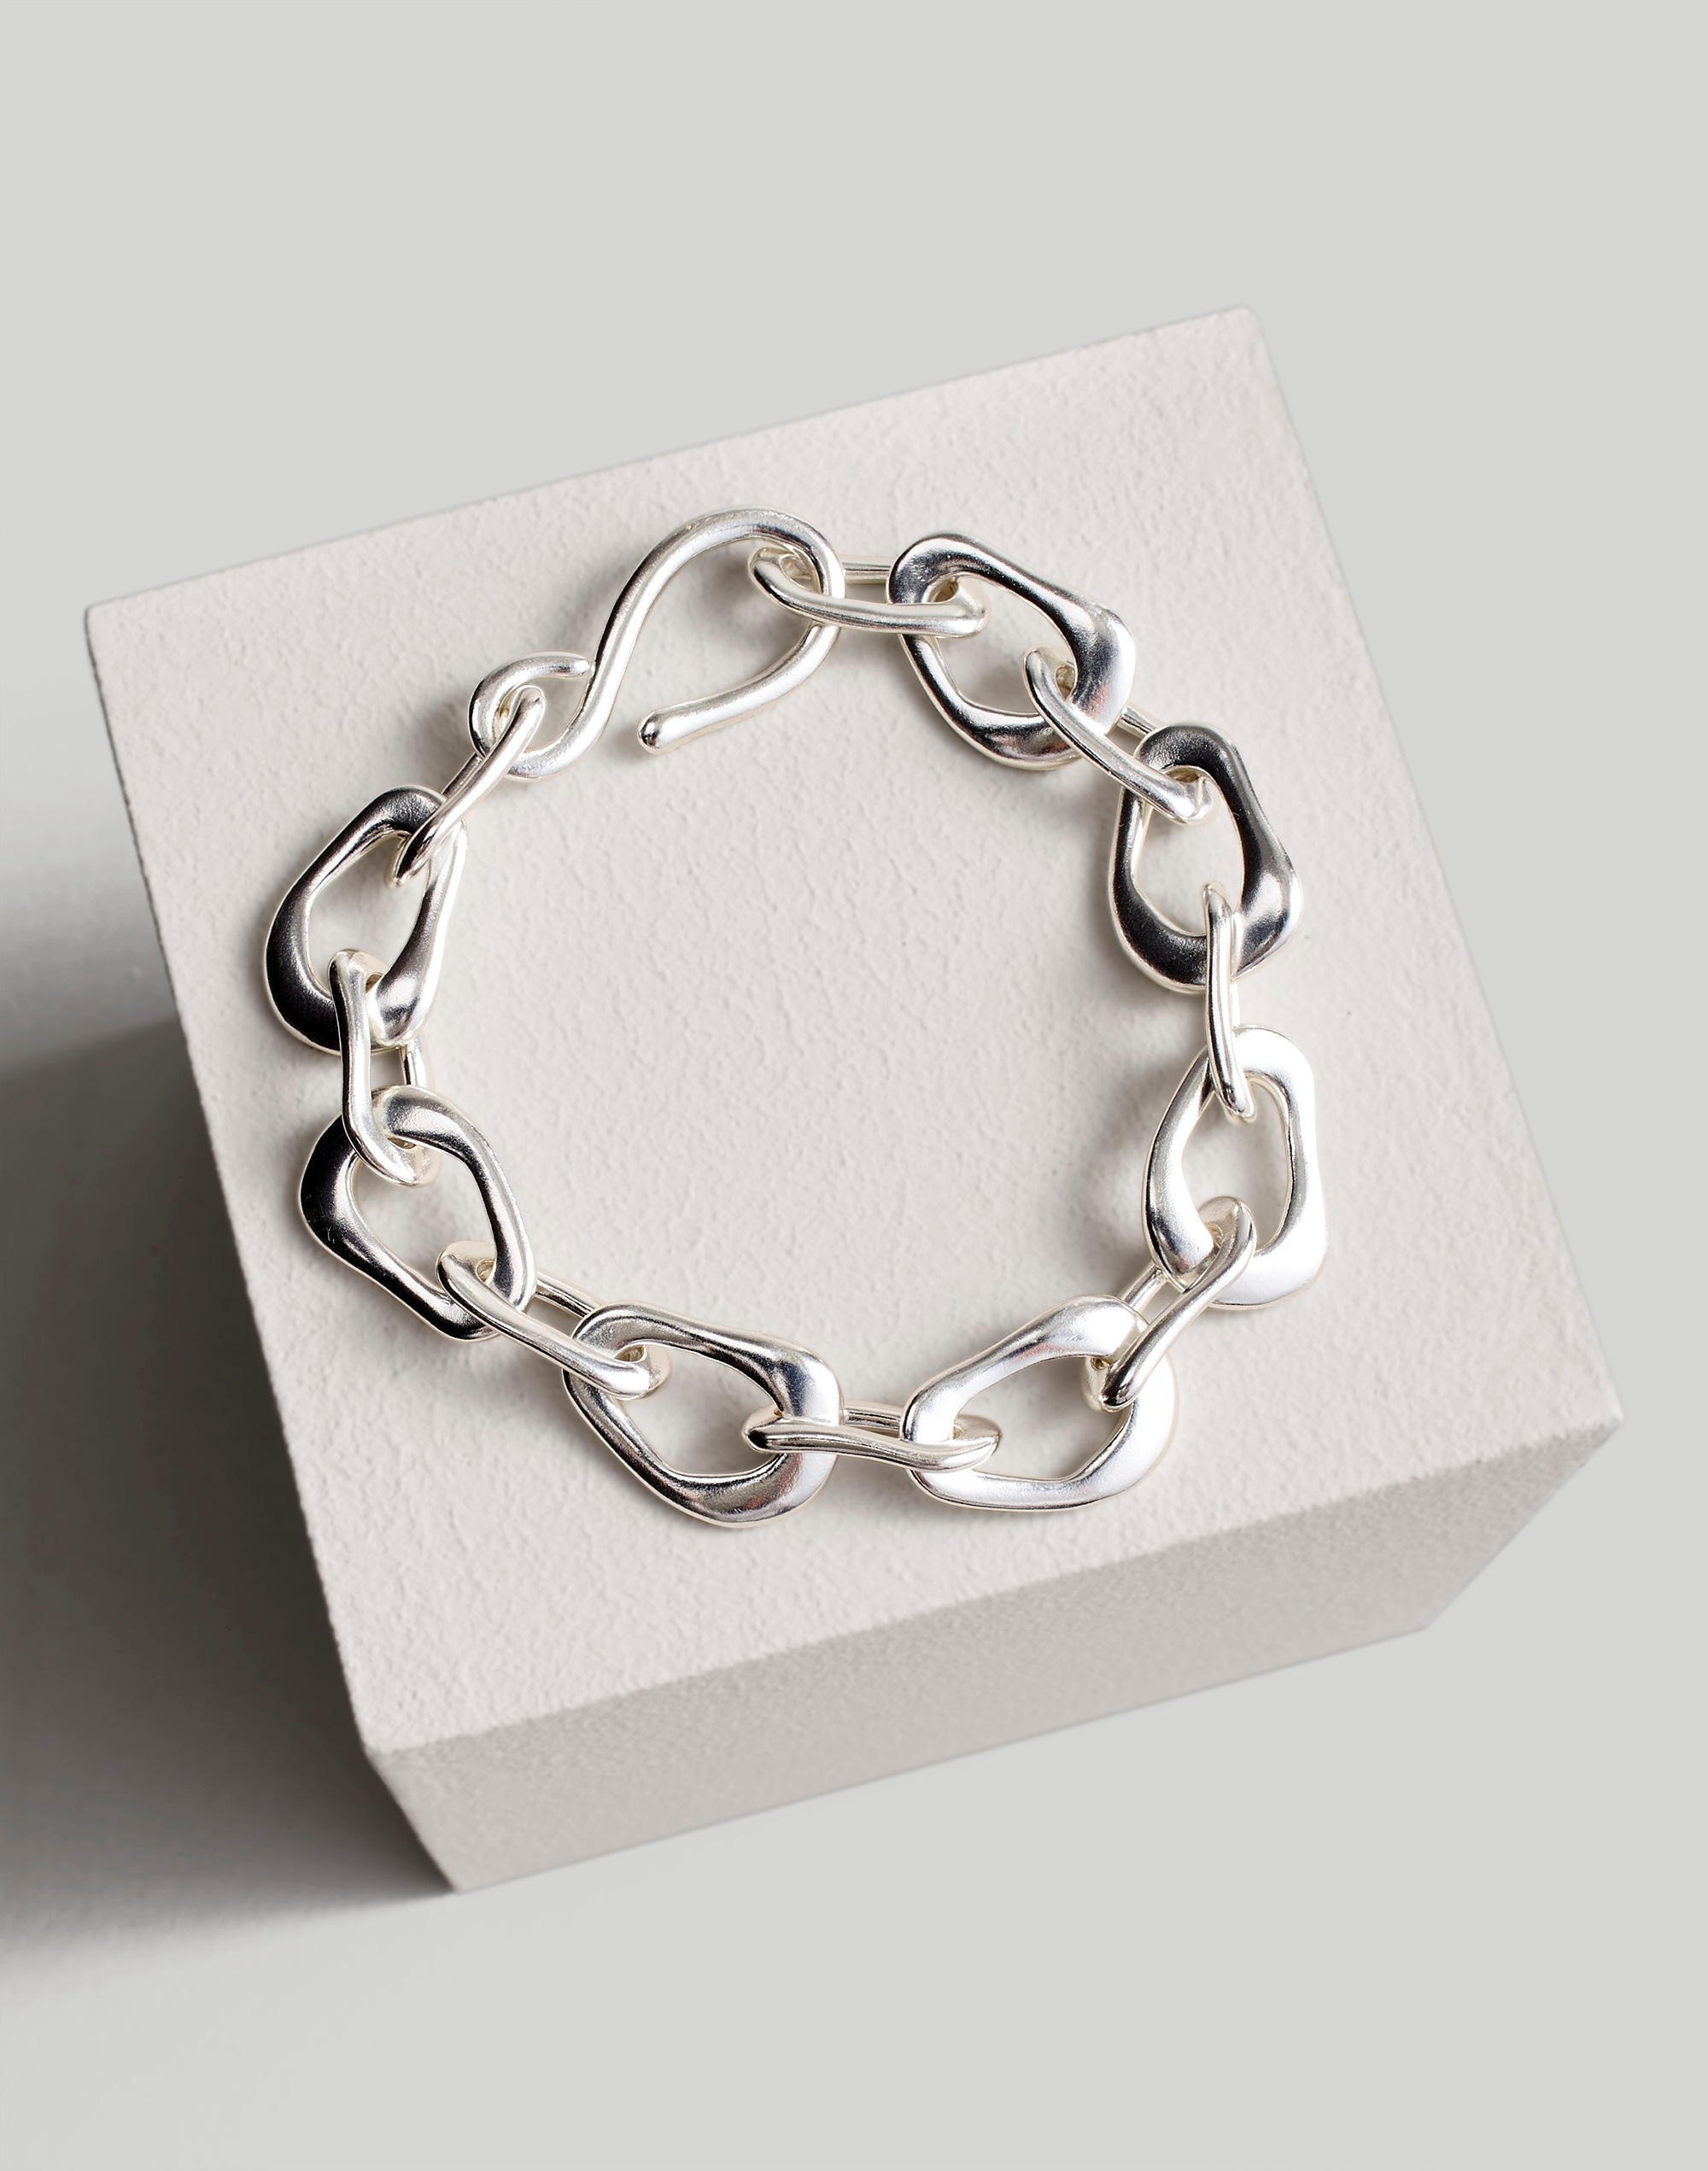 The Sterling Silver Collection Chunky Chain Bracelet